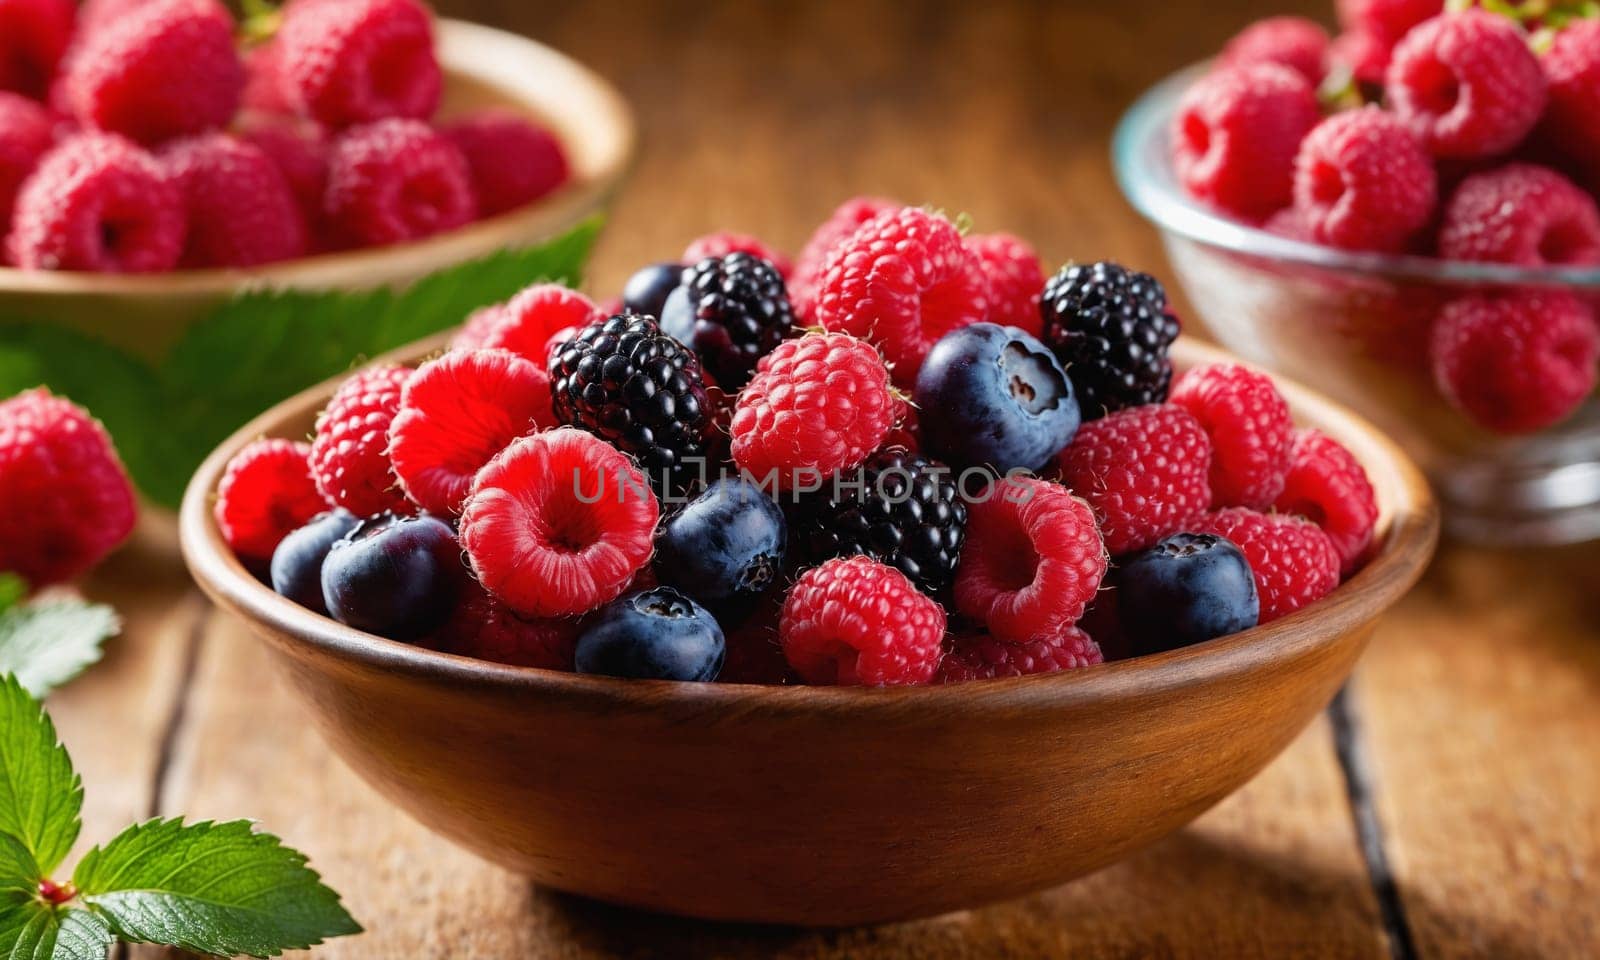 Fresh Raspberries and Blueberries in close-up by Andre1ns